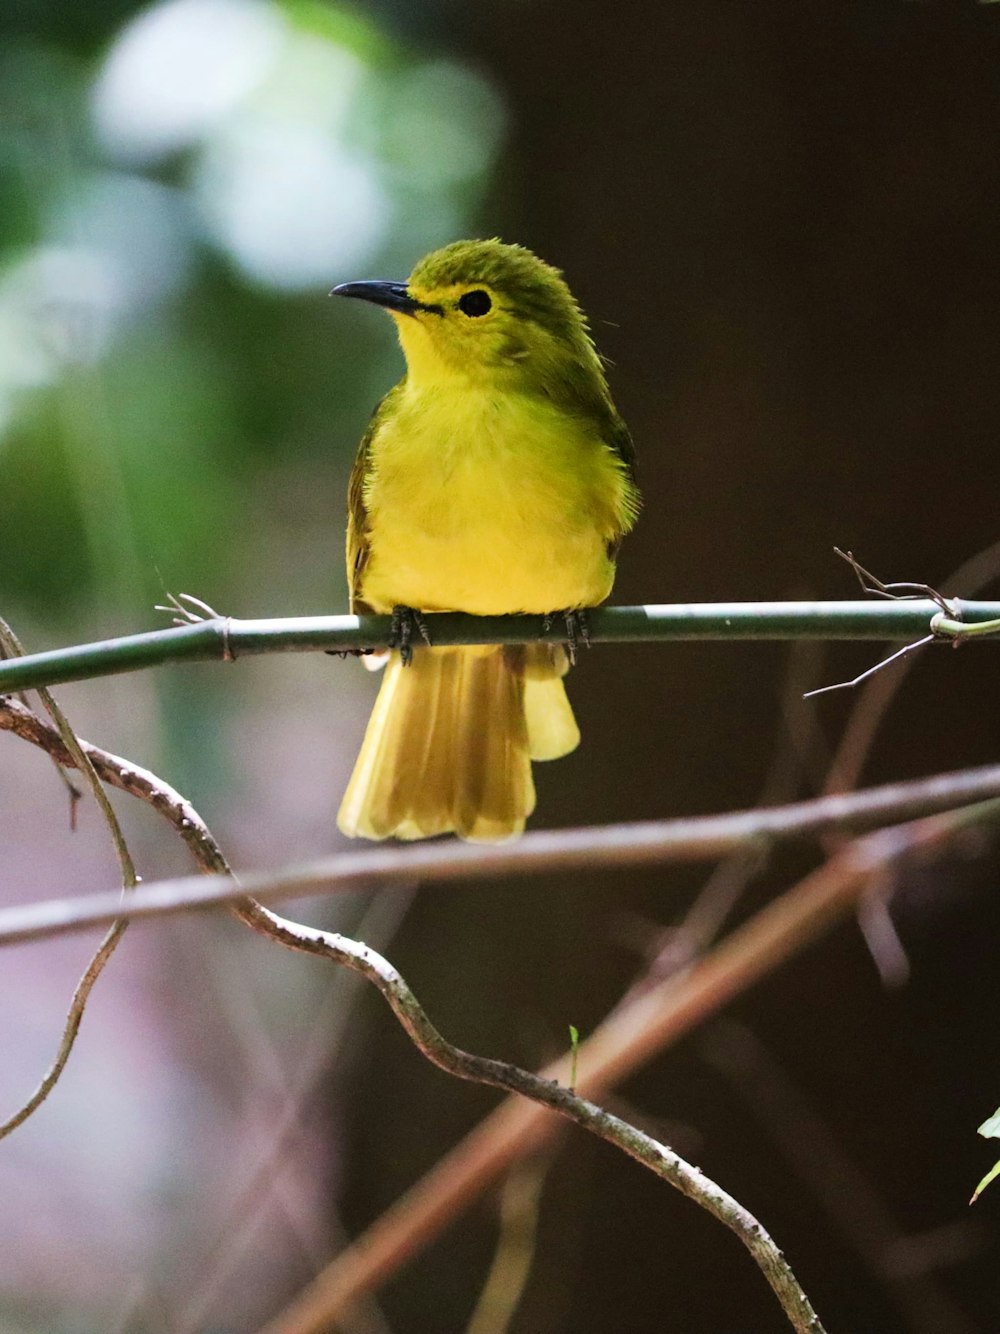 a small yellow bird sitting on a branch